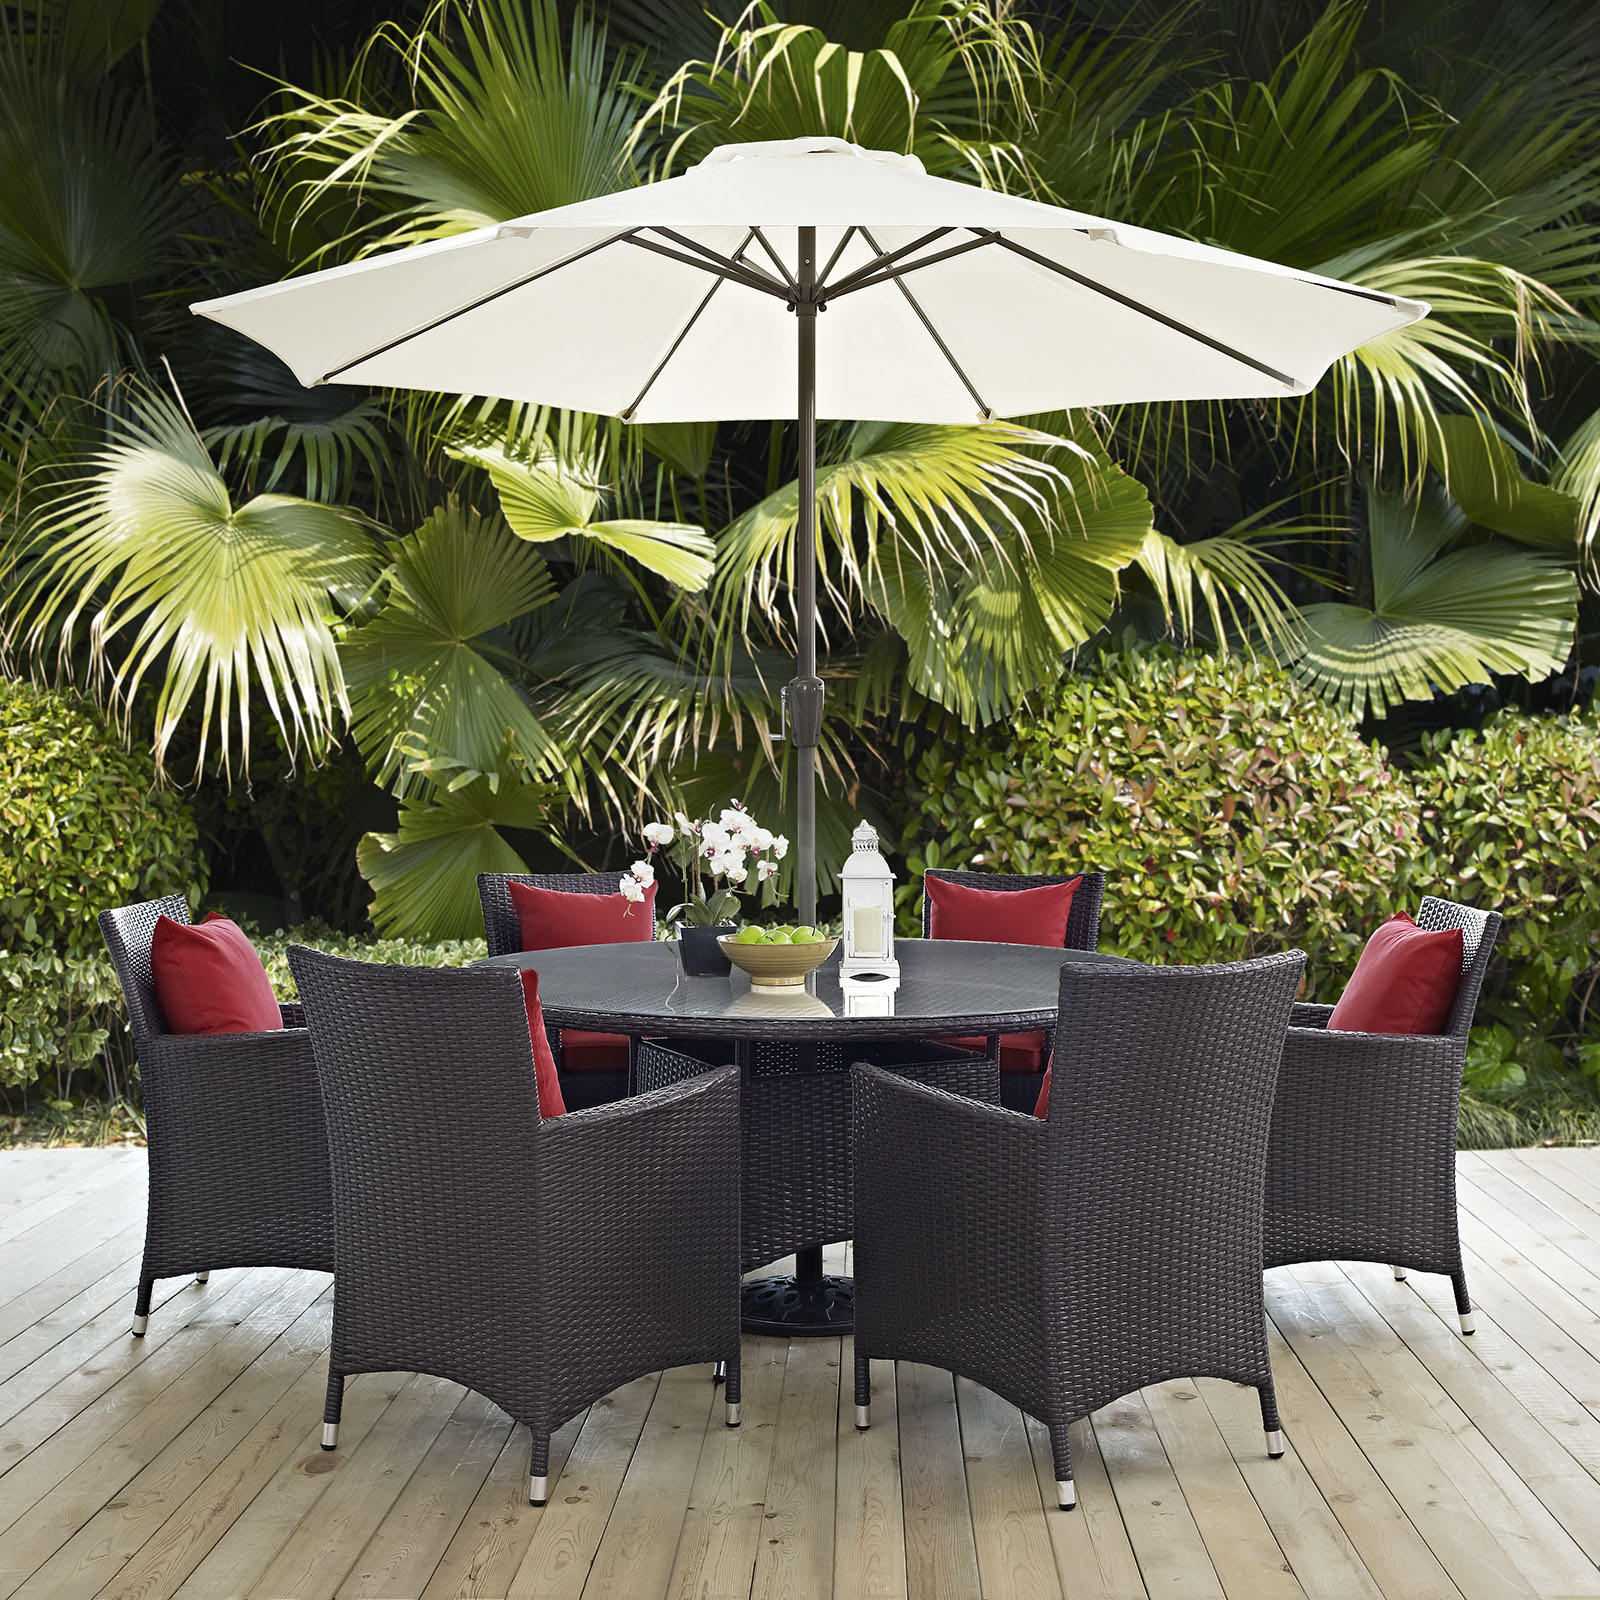 Modway Convene 8 Piece Outdoor Patio Dining Set in Espresso Red - image 1 of 6